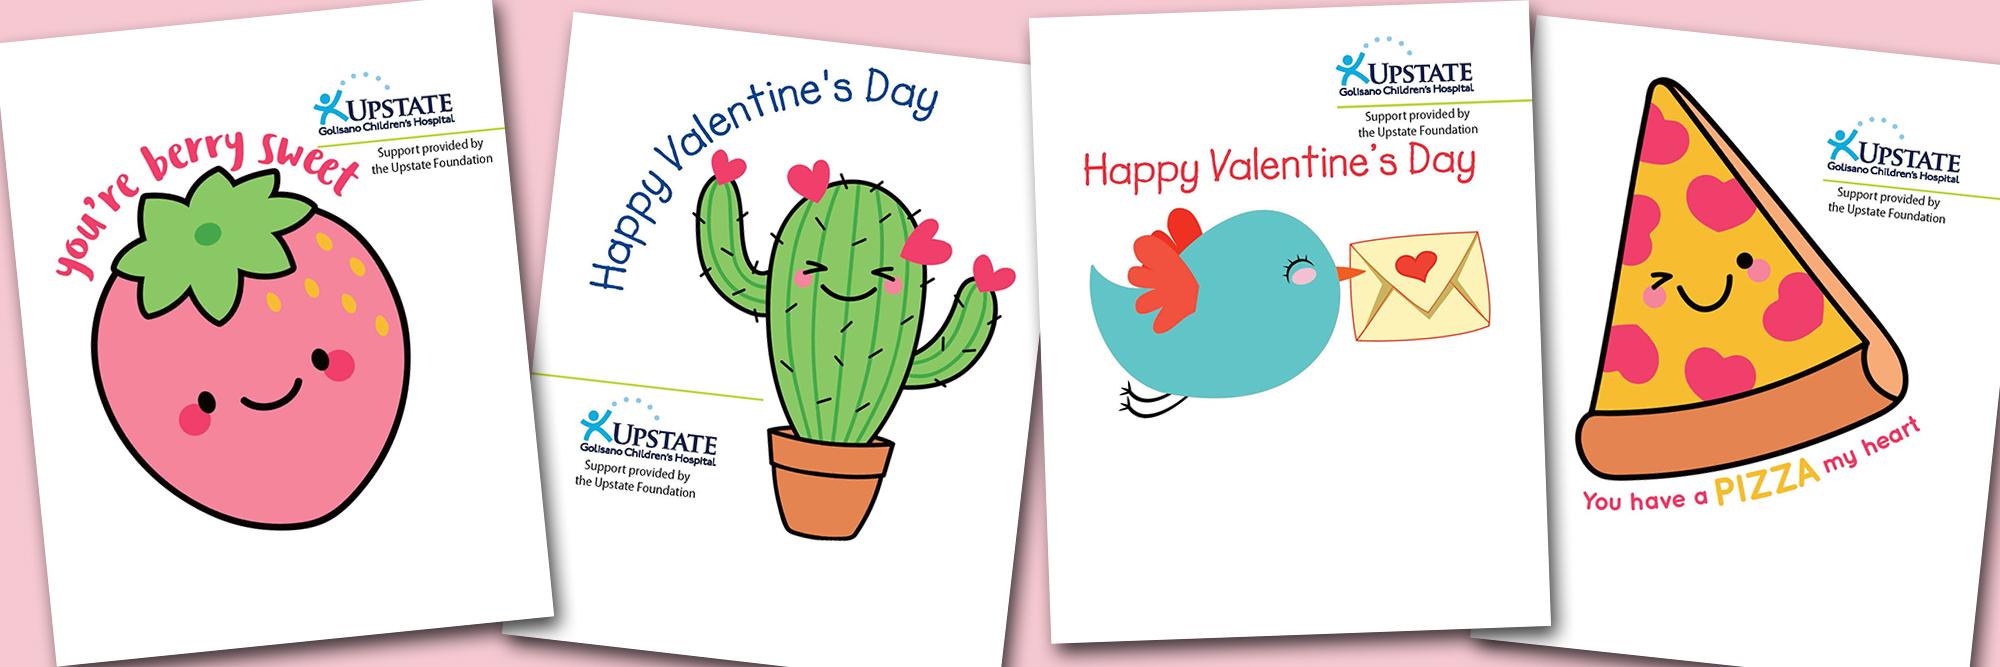 cards for valentine's day